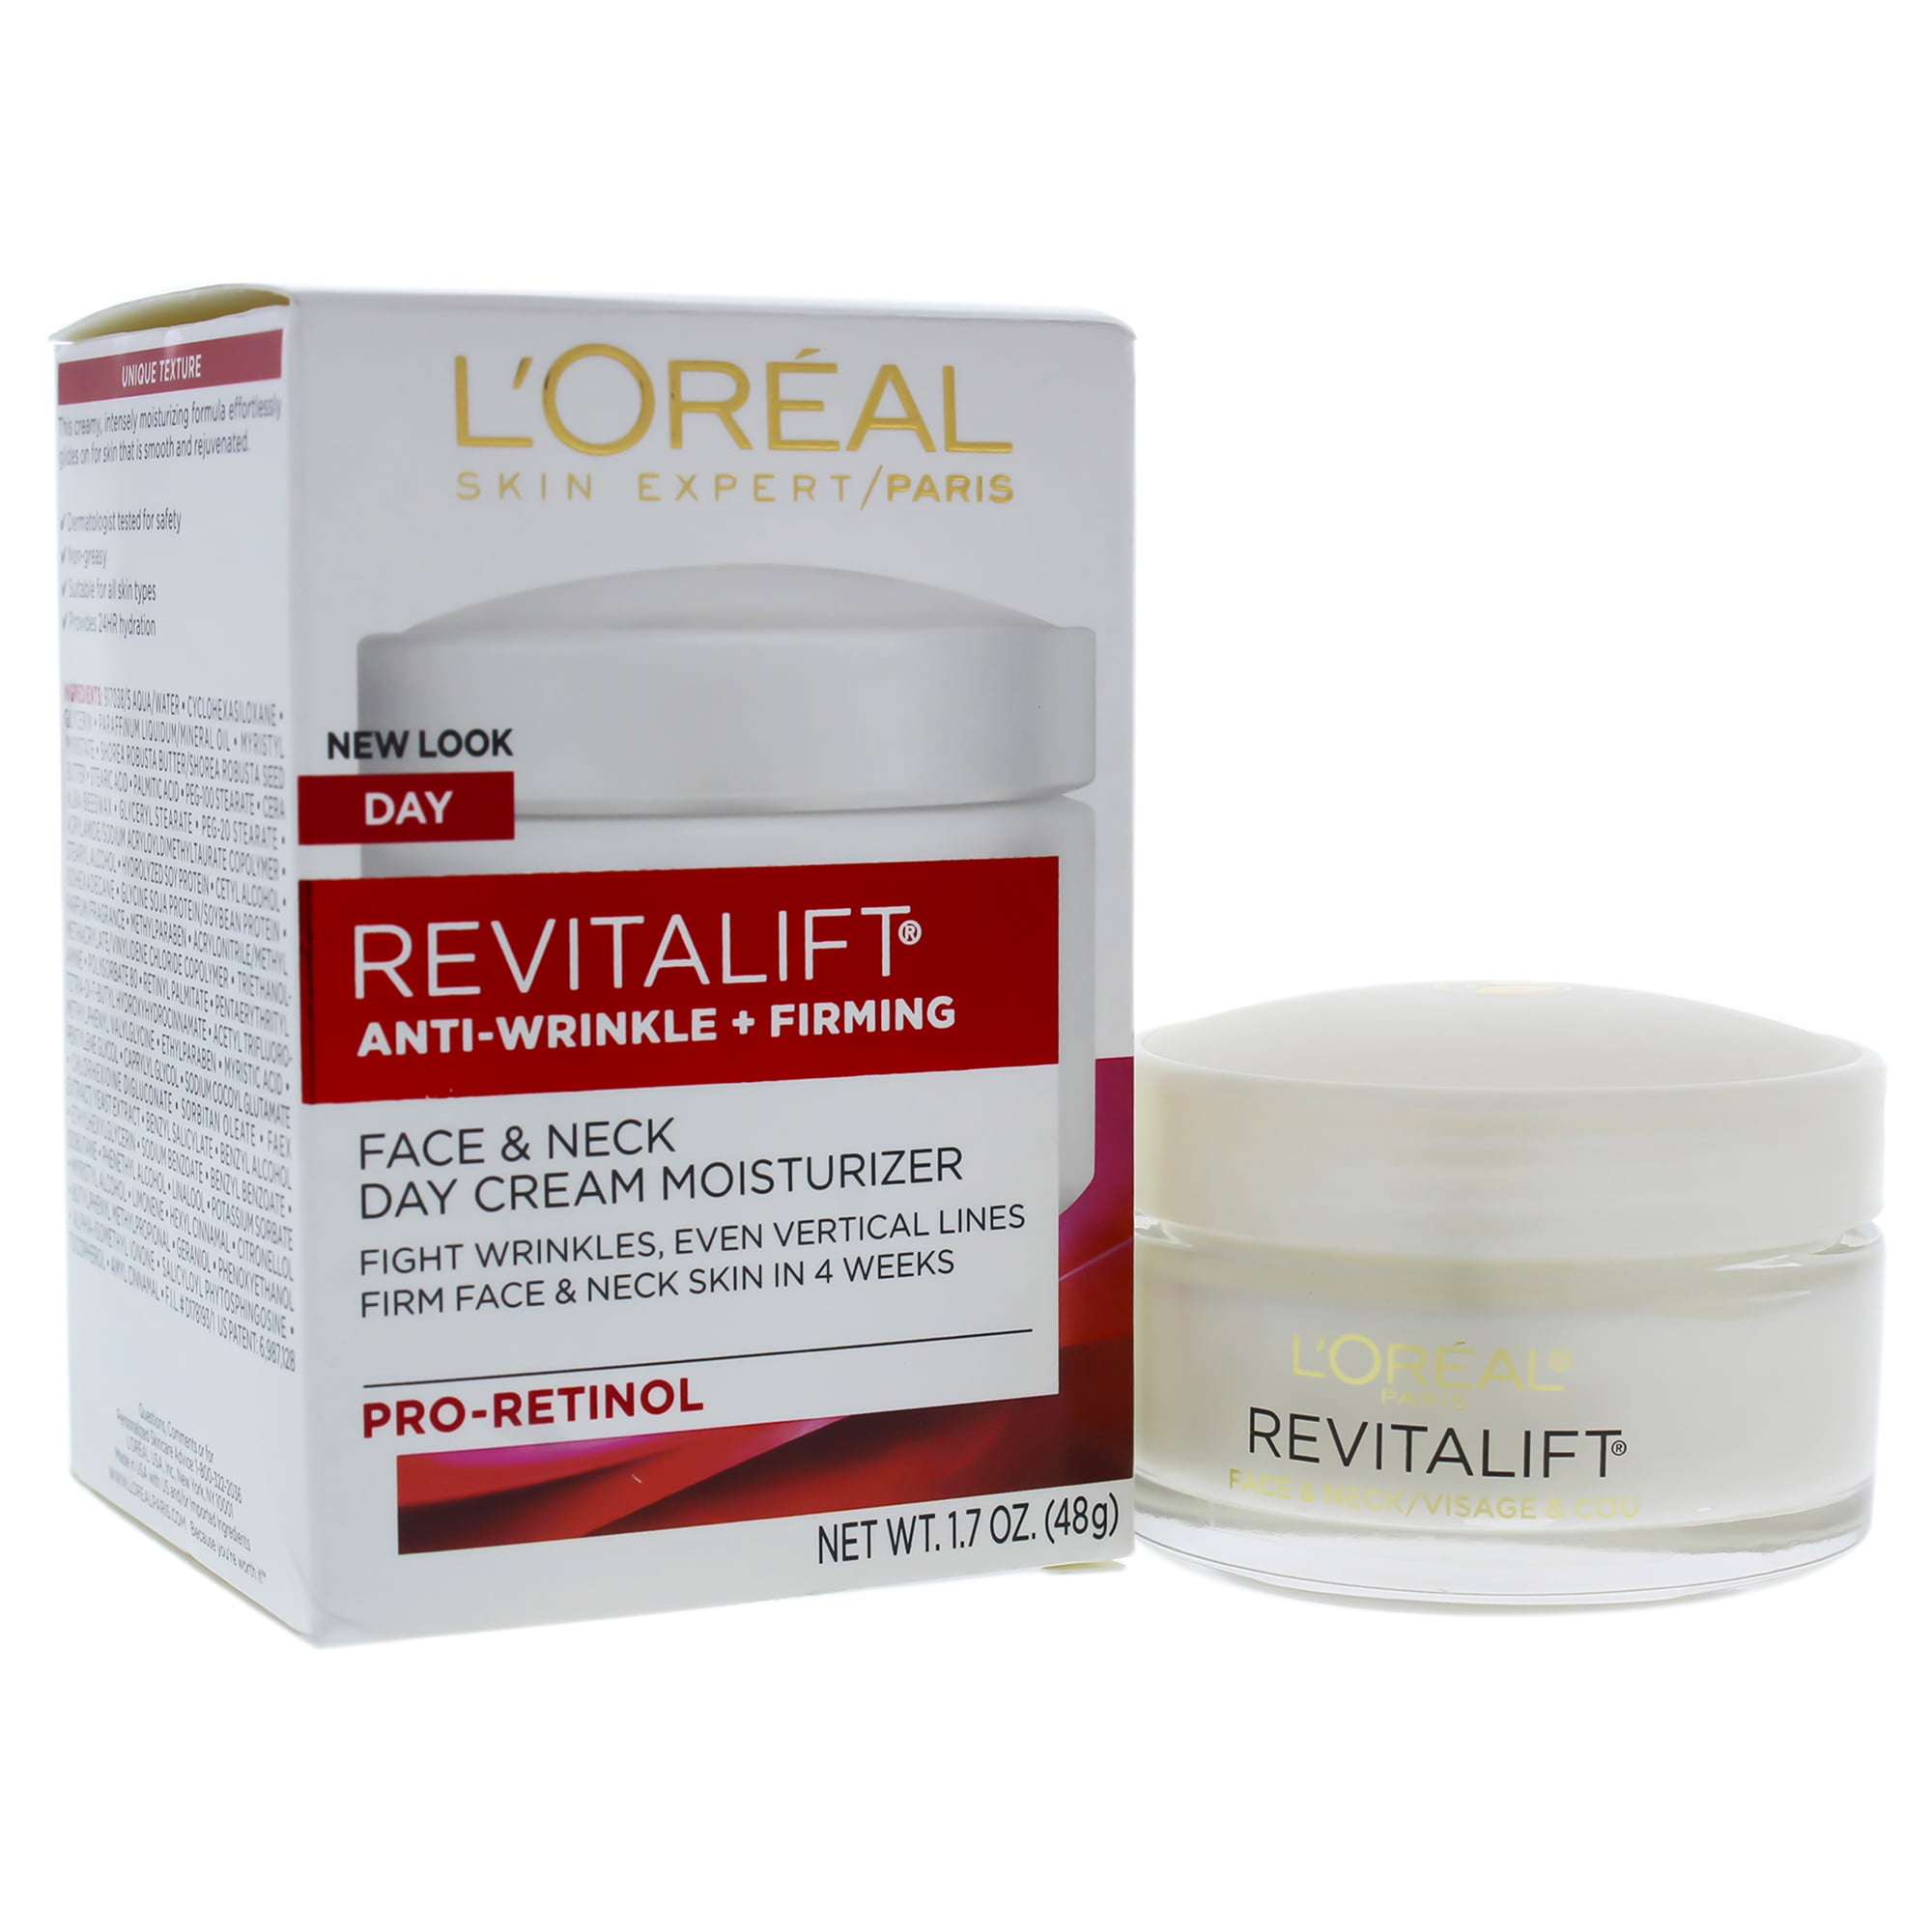 Revitalift Anti-Wrinkle and Firming Moisturizer For Face and Neck by LOreal Paris Unisex - 1.7 oz | Walmart Canada